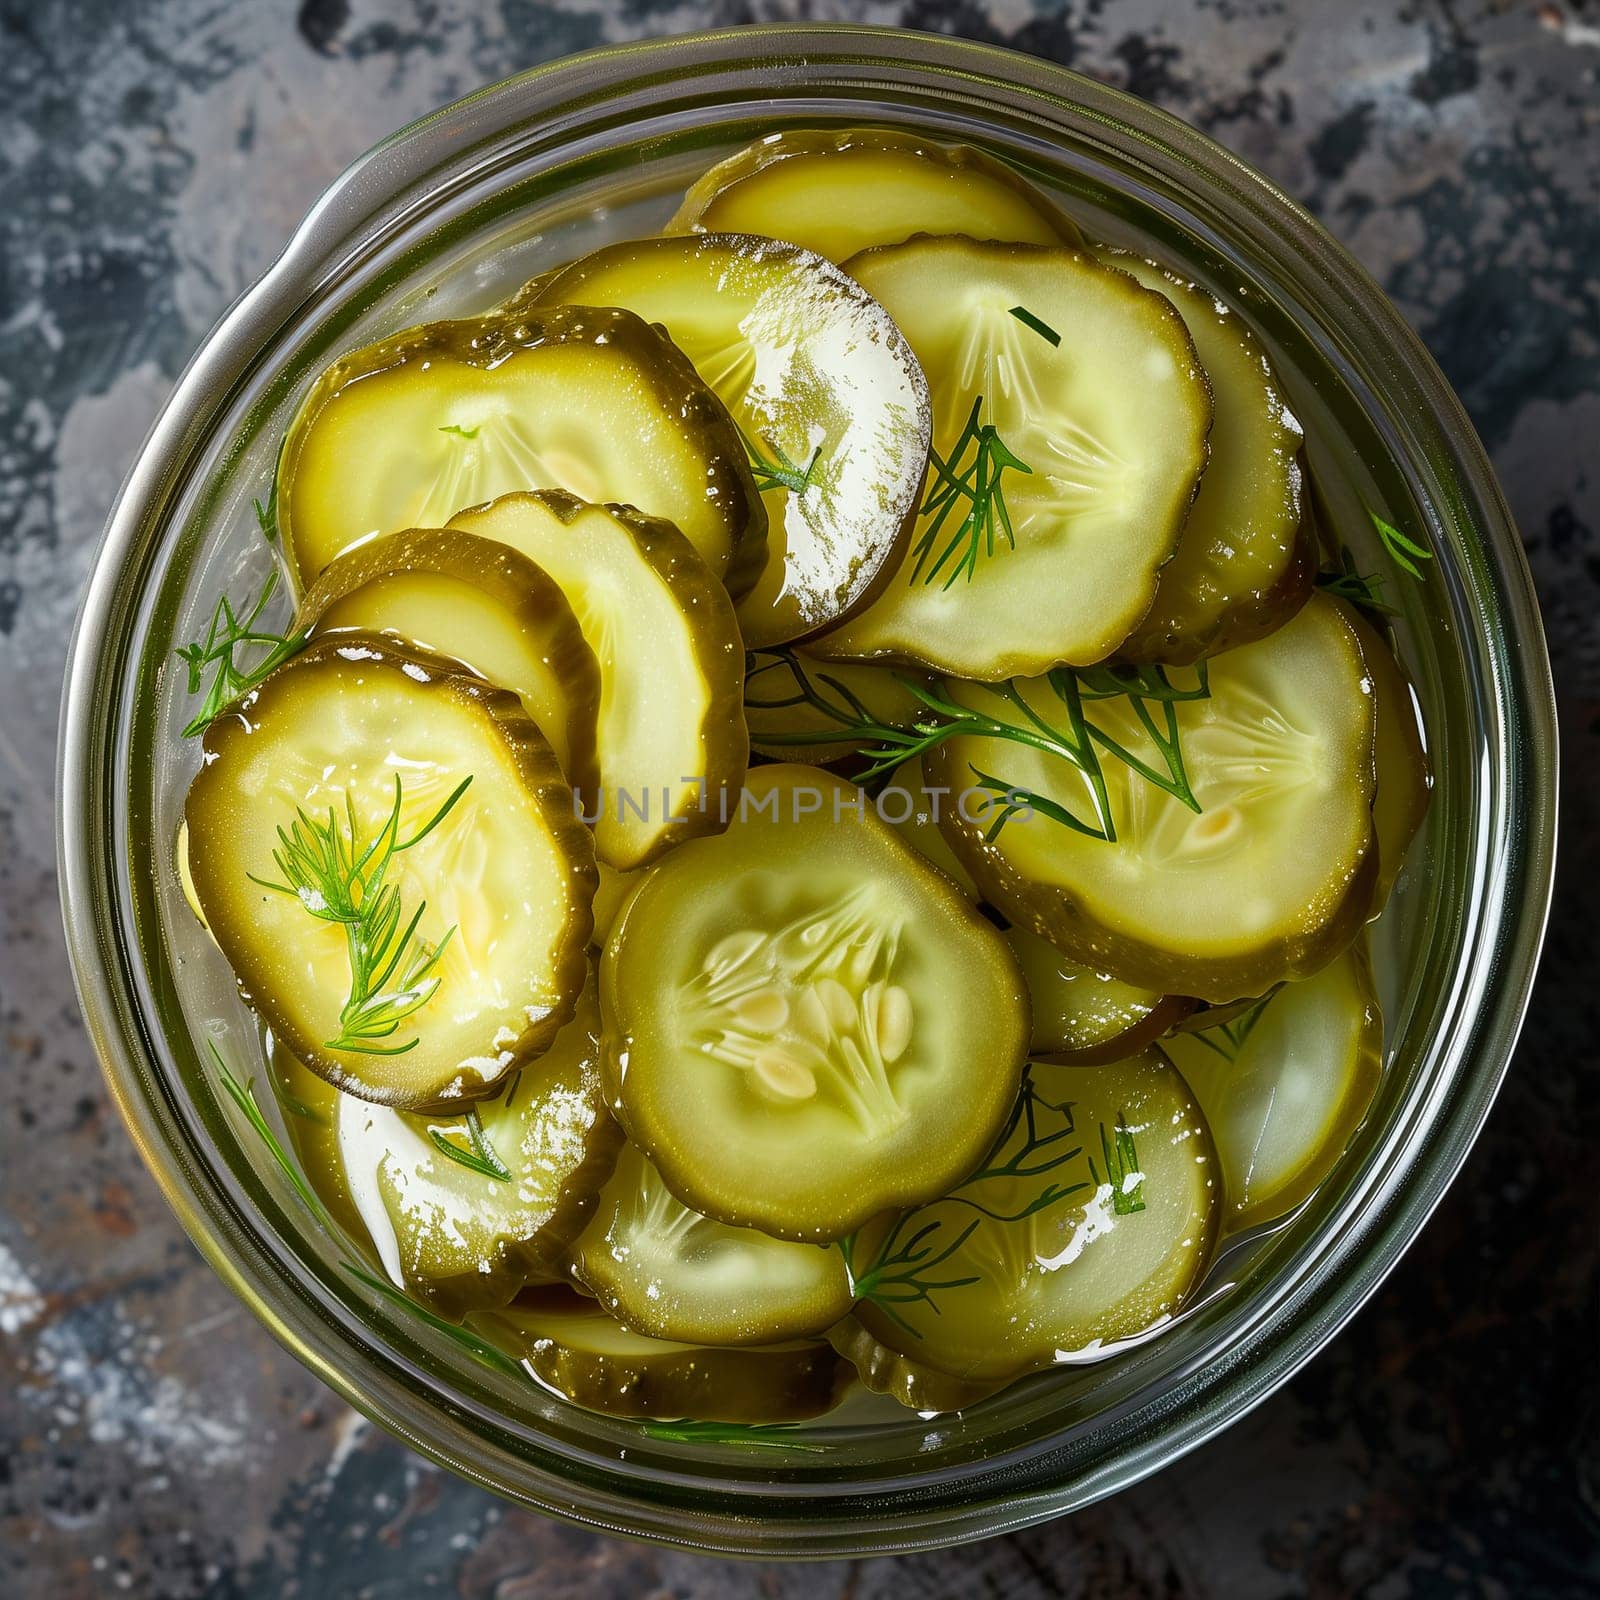 Glass Jar Filled With Sliced Cucumbers by Sd28DimoN_1976